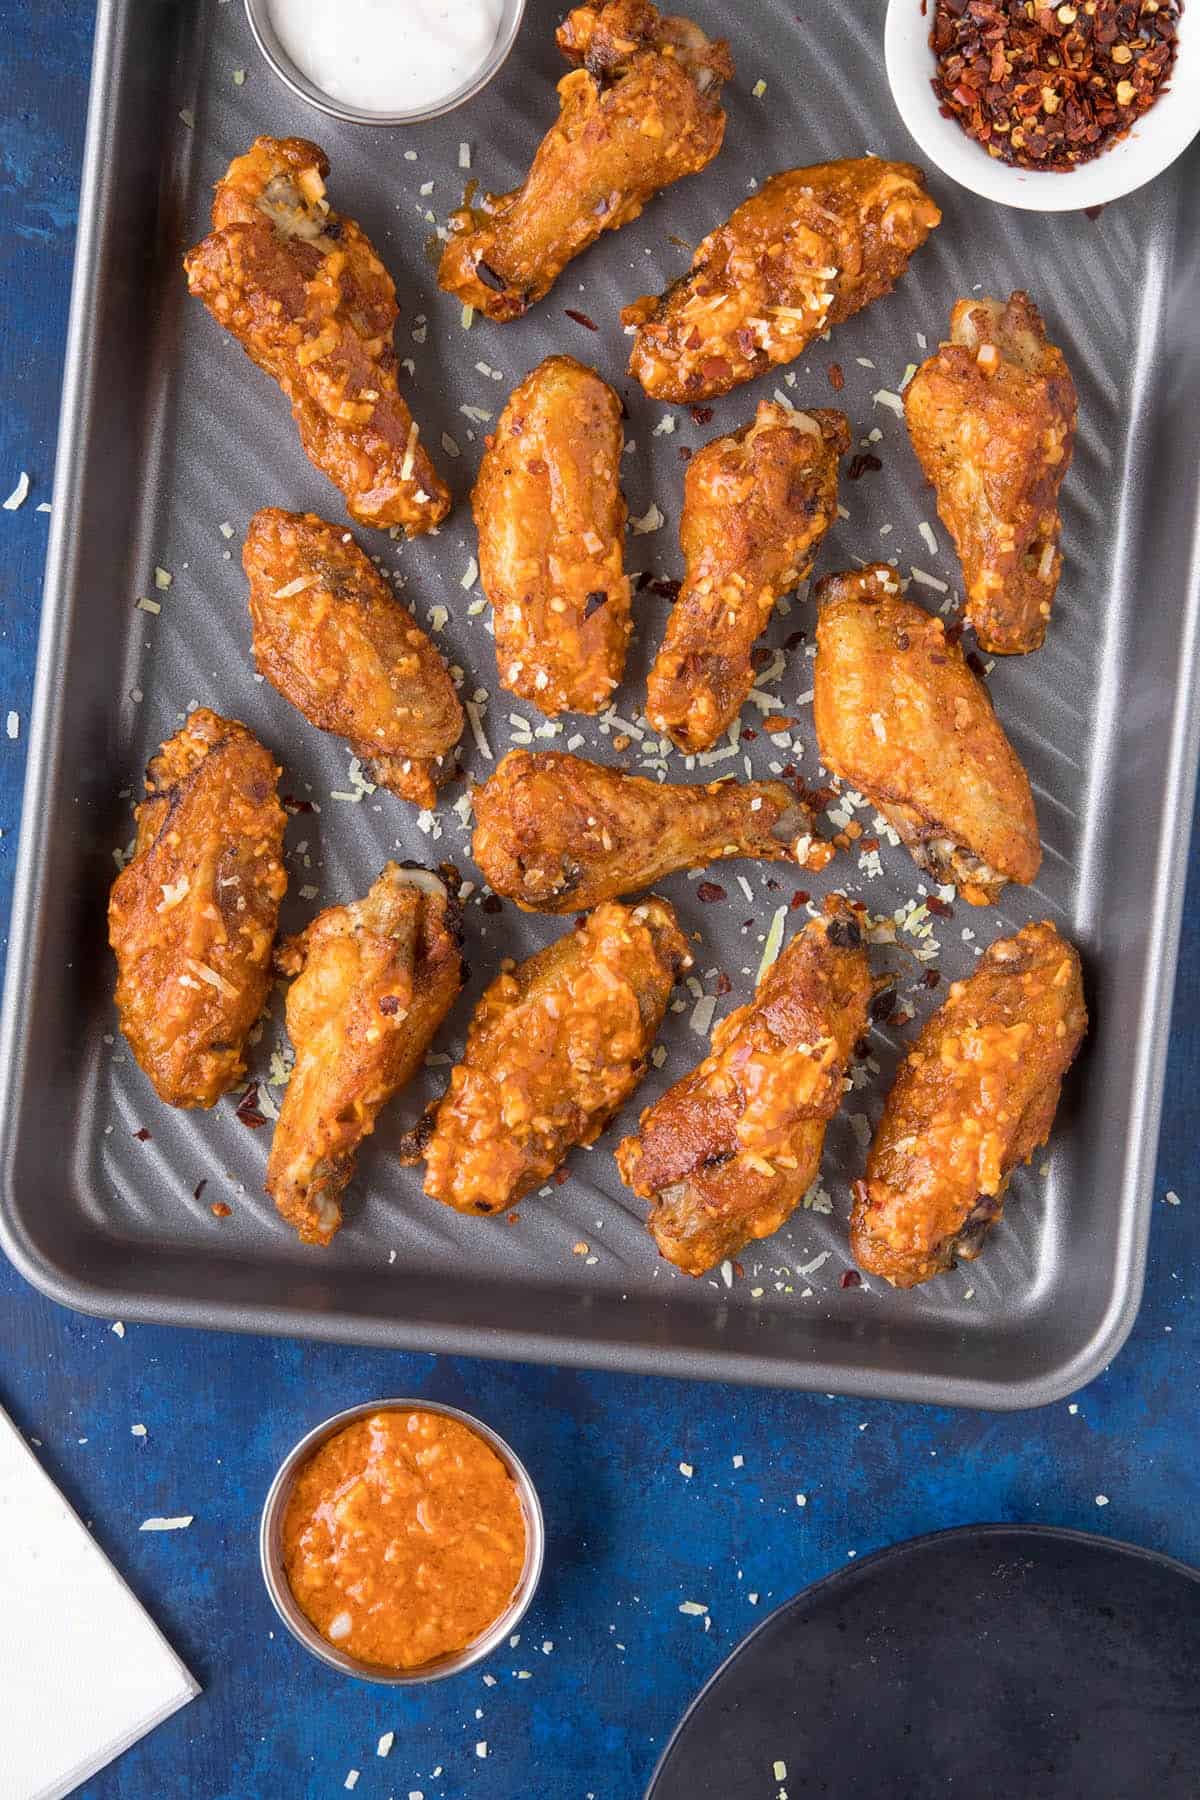 Garlic Parmesan Chicken Wings - In a pan, ready to serve